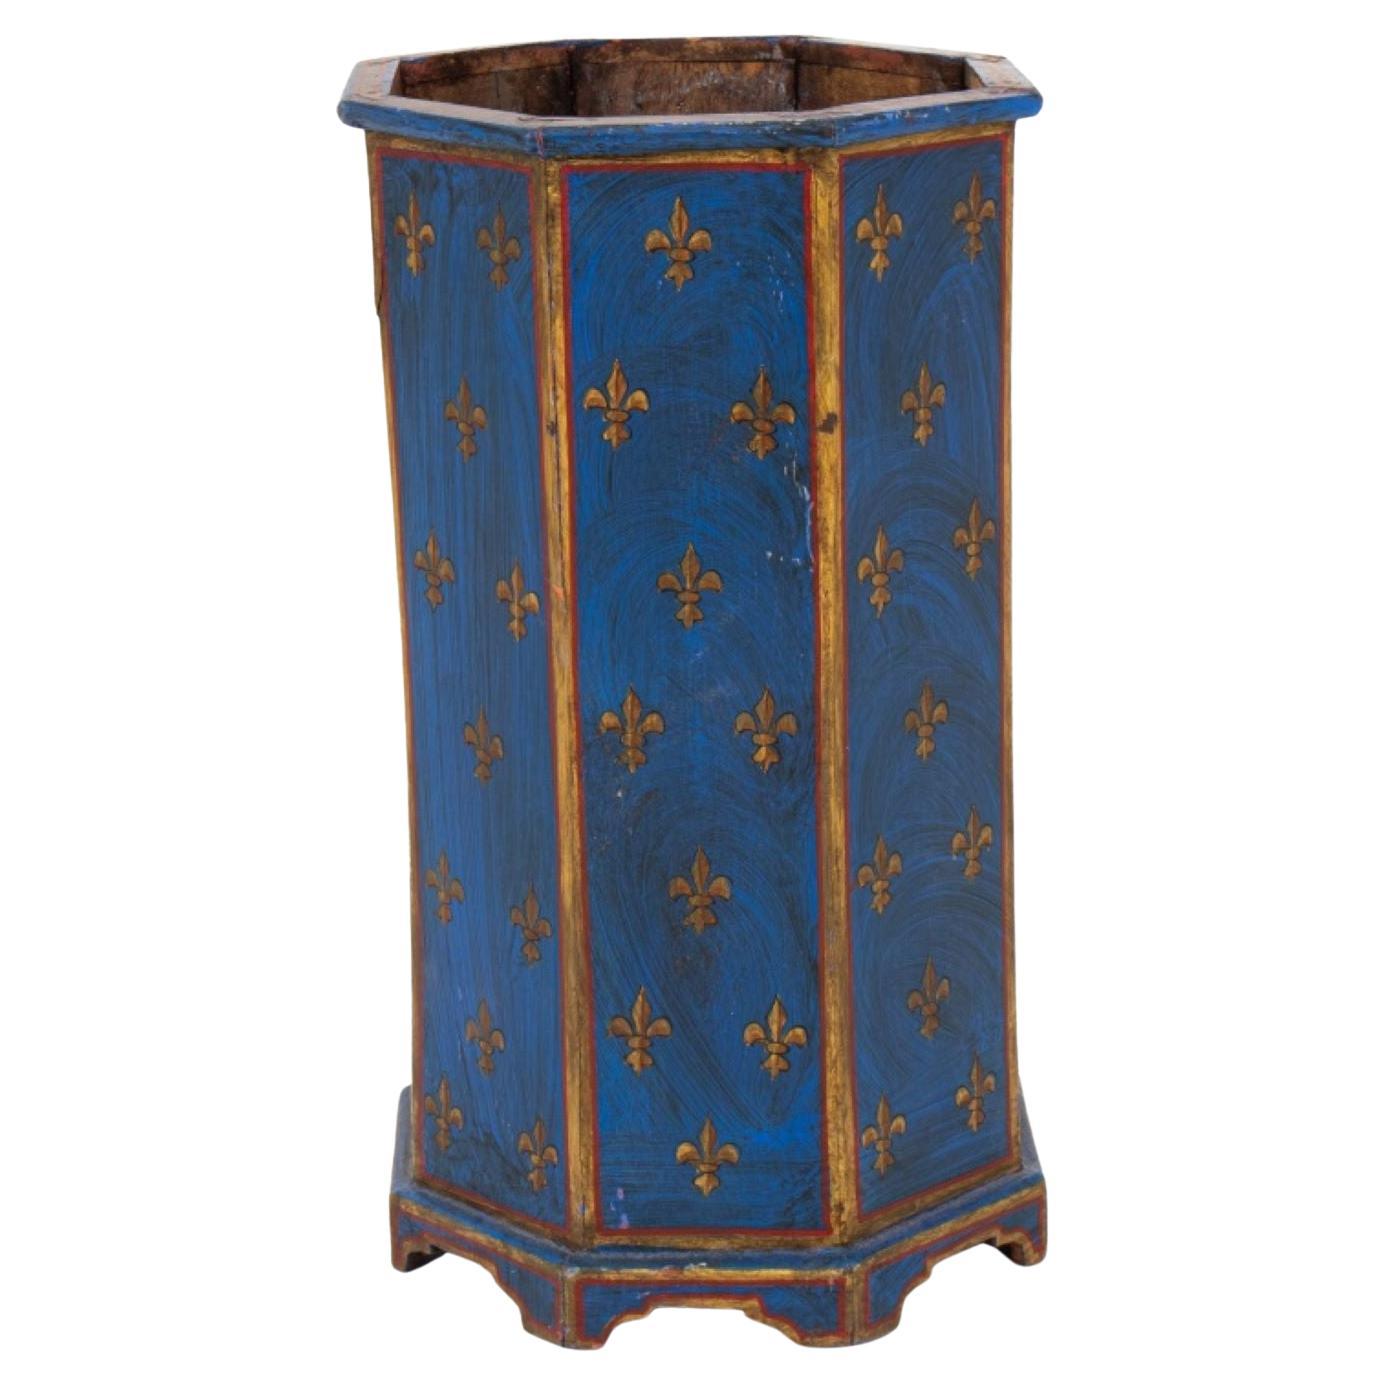 Octagonal Painted Umbrella or Cane Stand